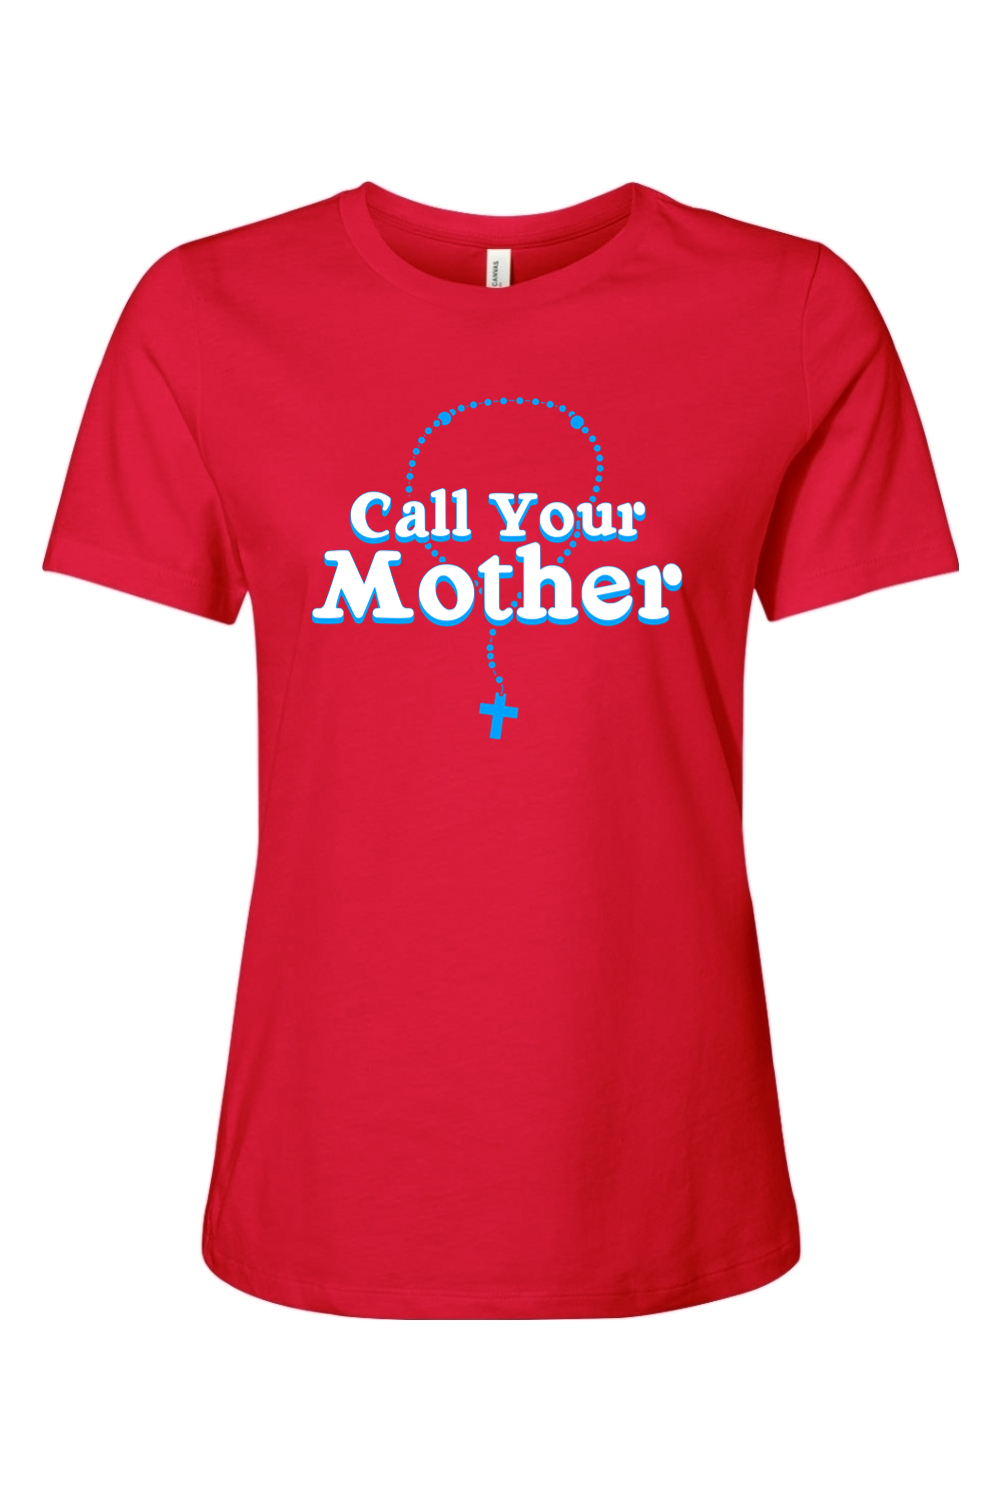 Call Your Mother - Ladies Tee